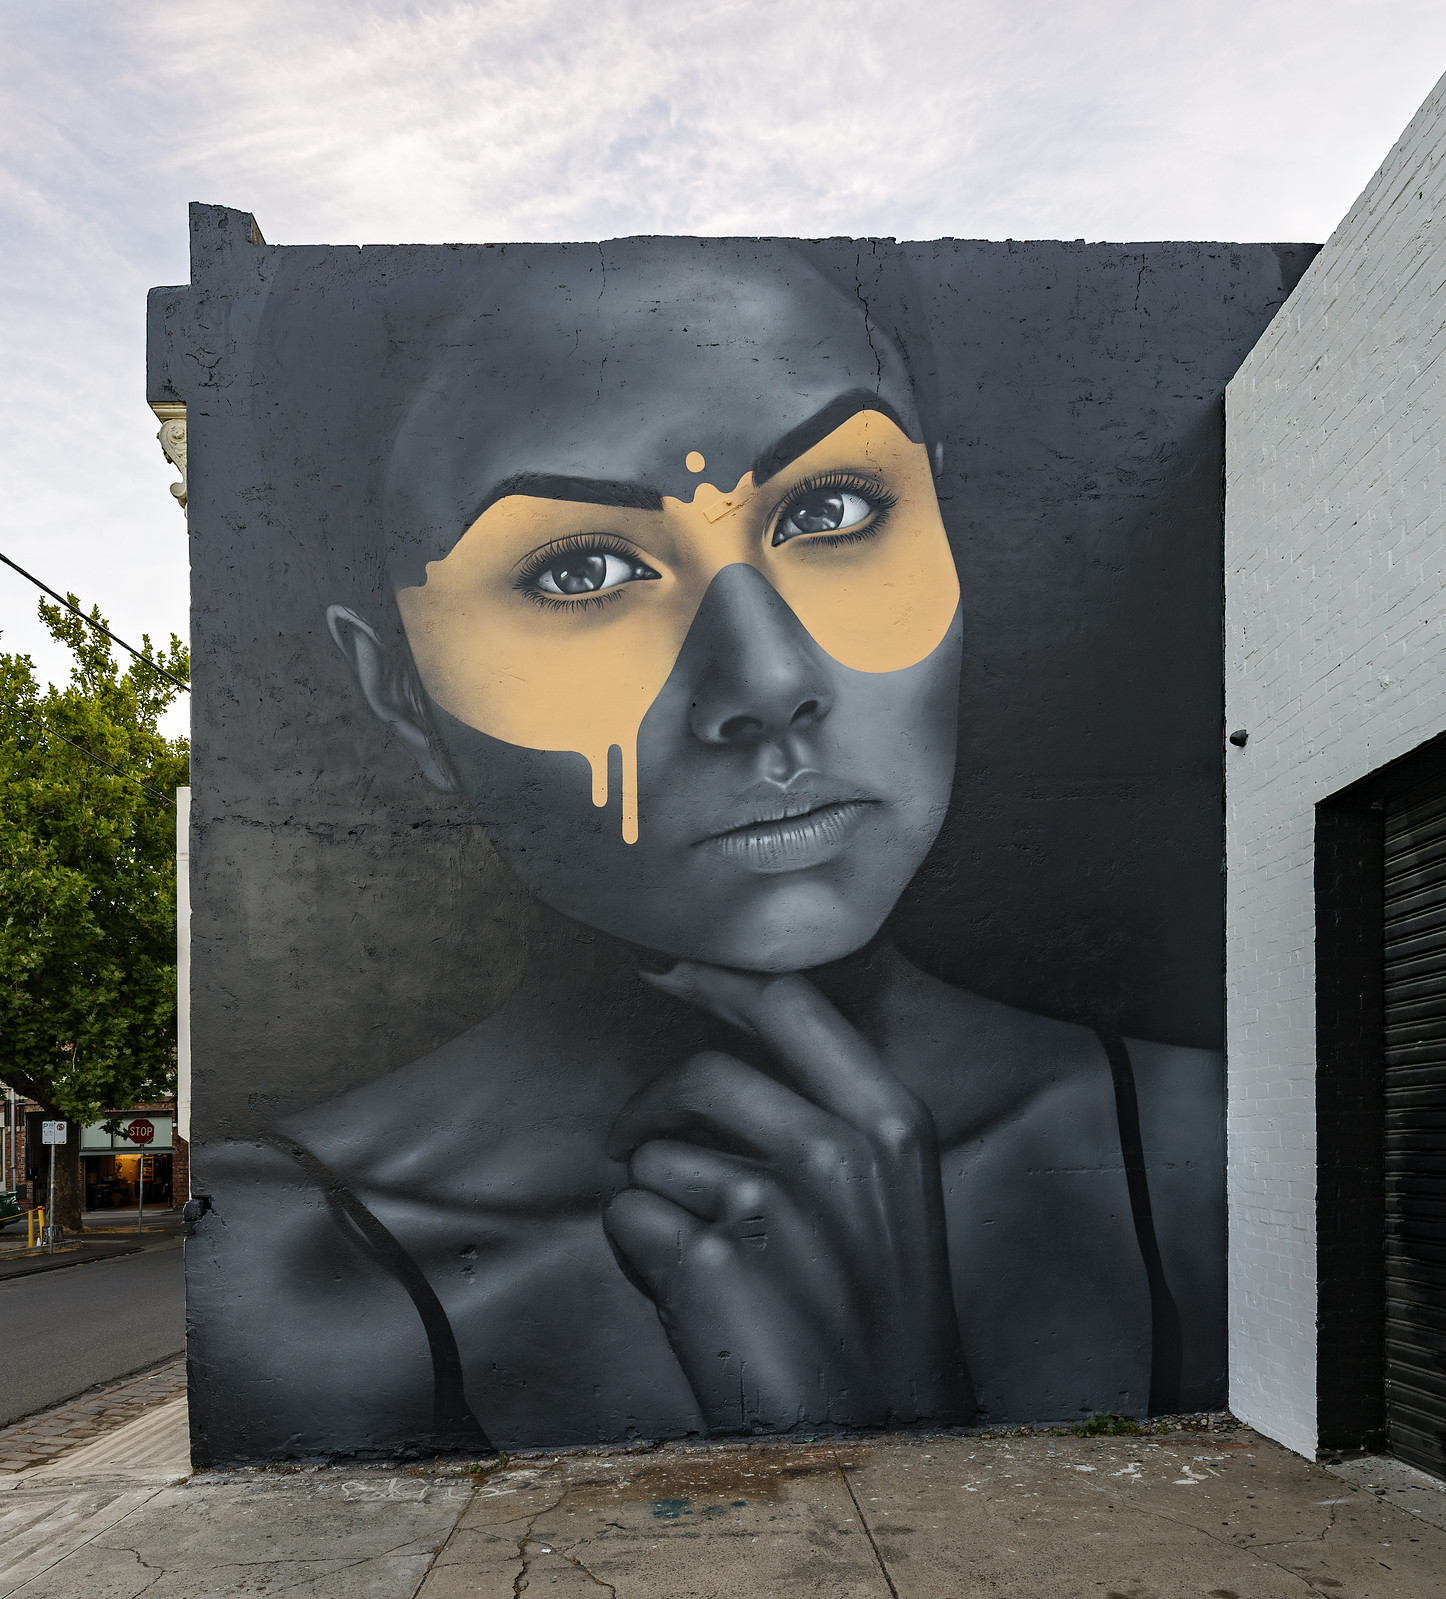 Street Art by Fin DAC in Fitzroy, Melbourne, Australia Photo by Andrew.